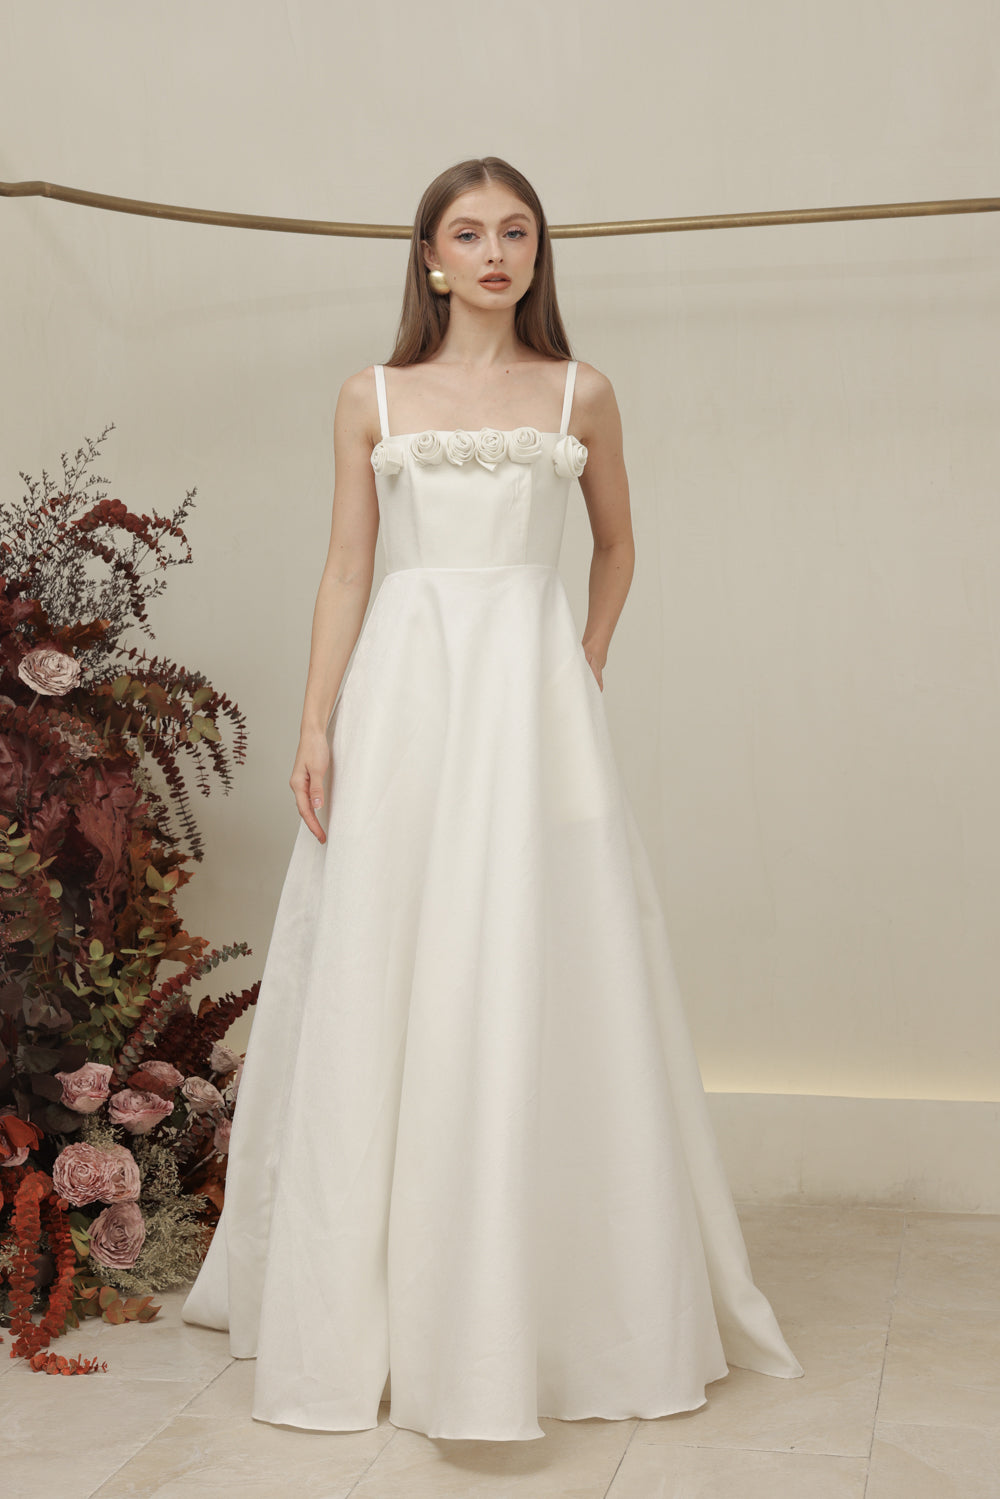 MARCELINE DRESS Straight Neckline Strappy Maxi Gown with Floral Details and Pockets (Ivory White Gazaar)